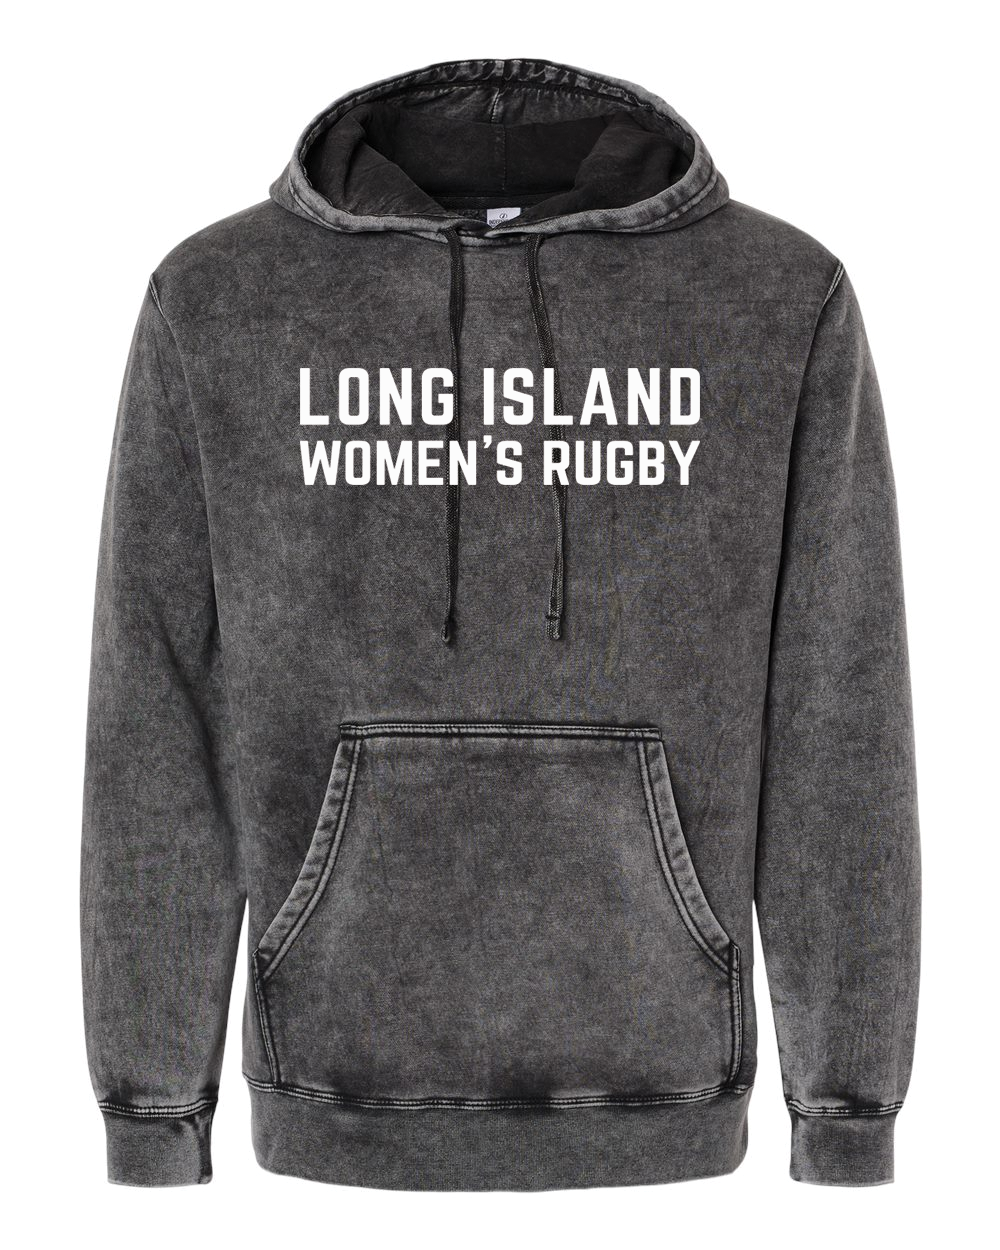 Long Island Women's Rugby Midweight Mineral Wash Hooded Sweatshirt - PRM4500MW